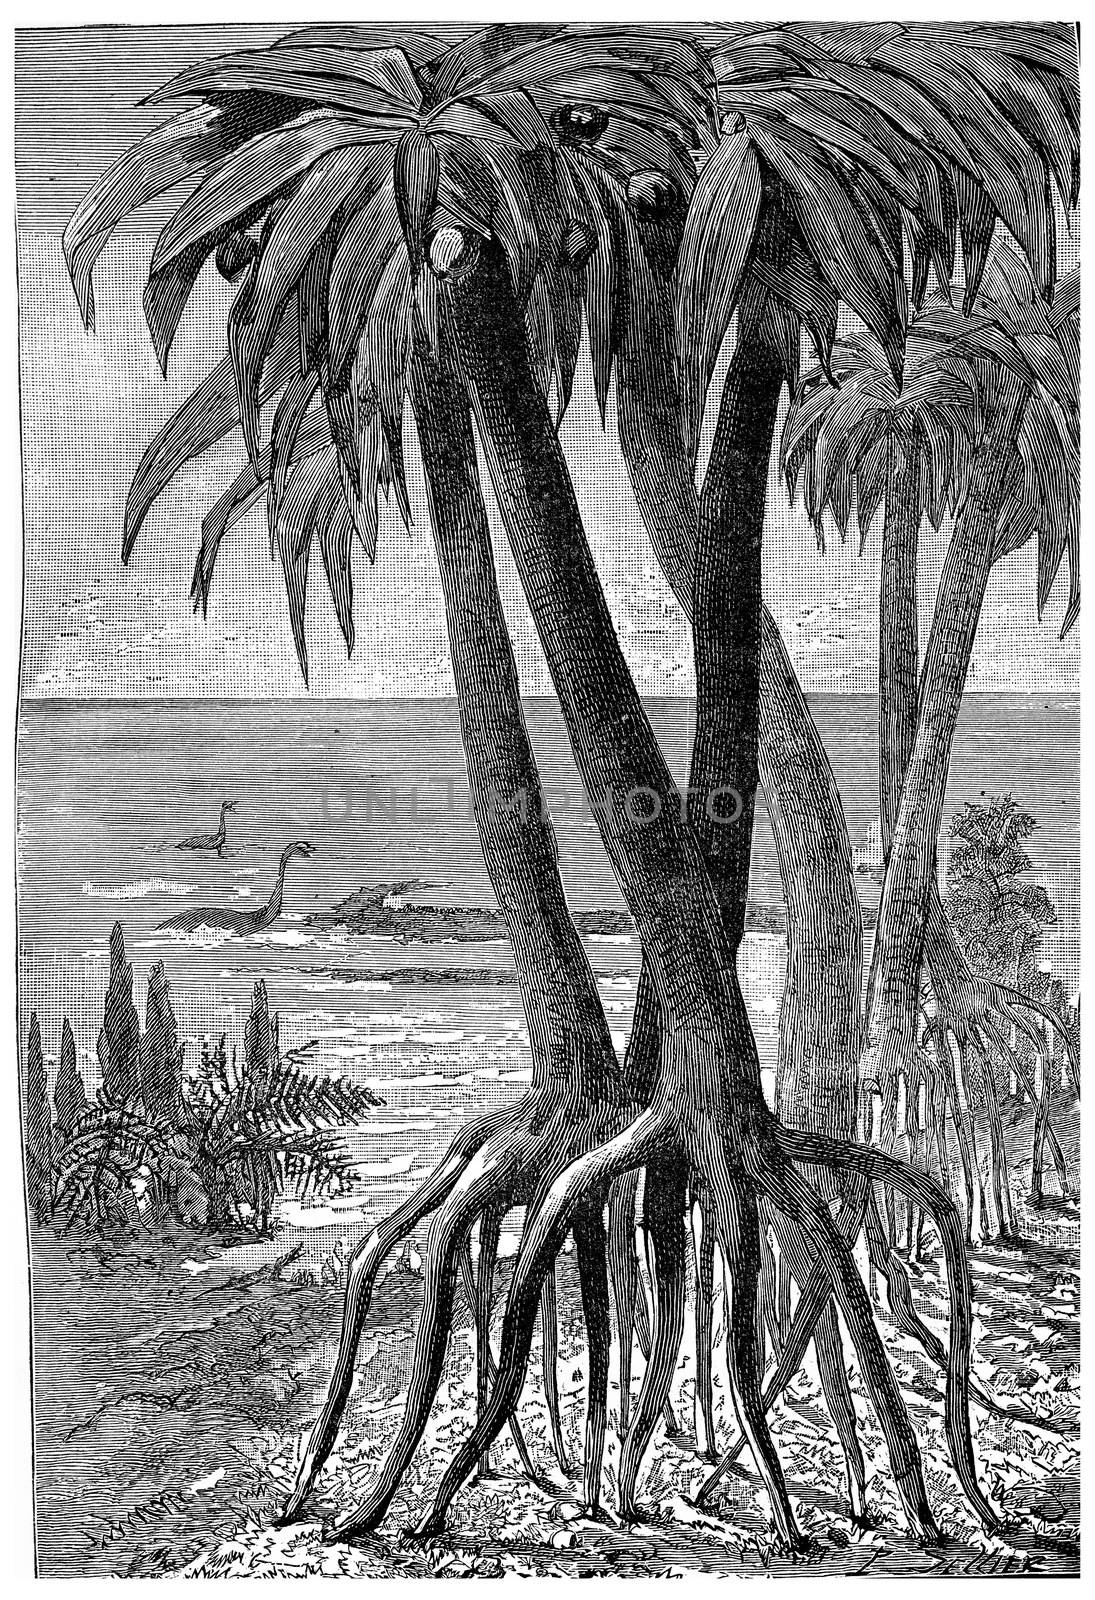 At the edge of the sea during the Jurassic period, vintage engraved illustration. Earth before man – 1886.